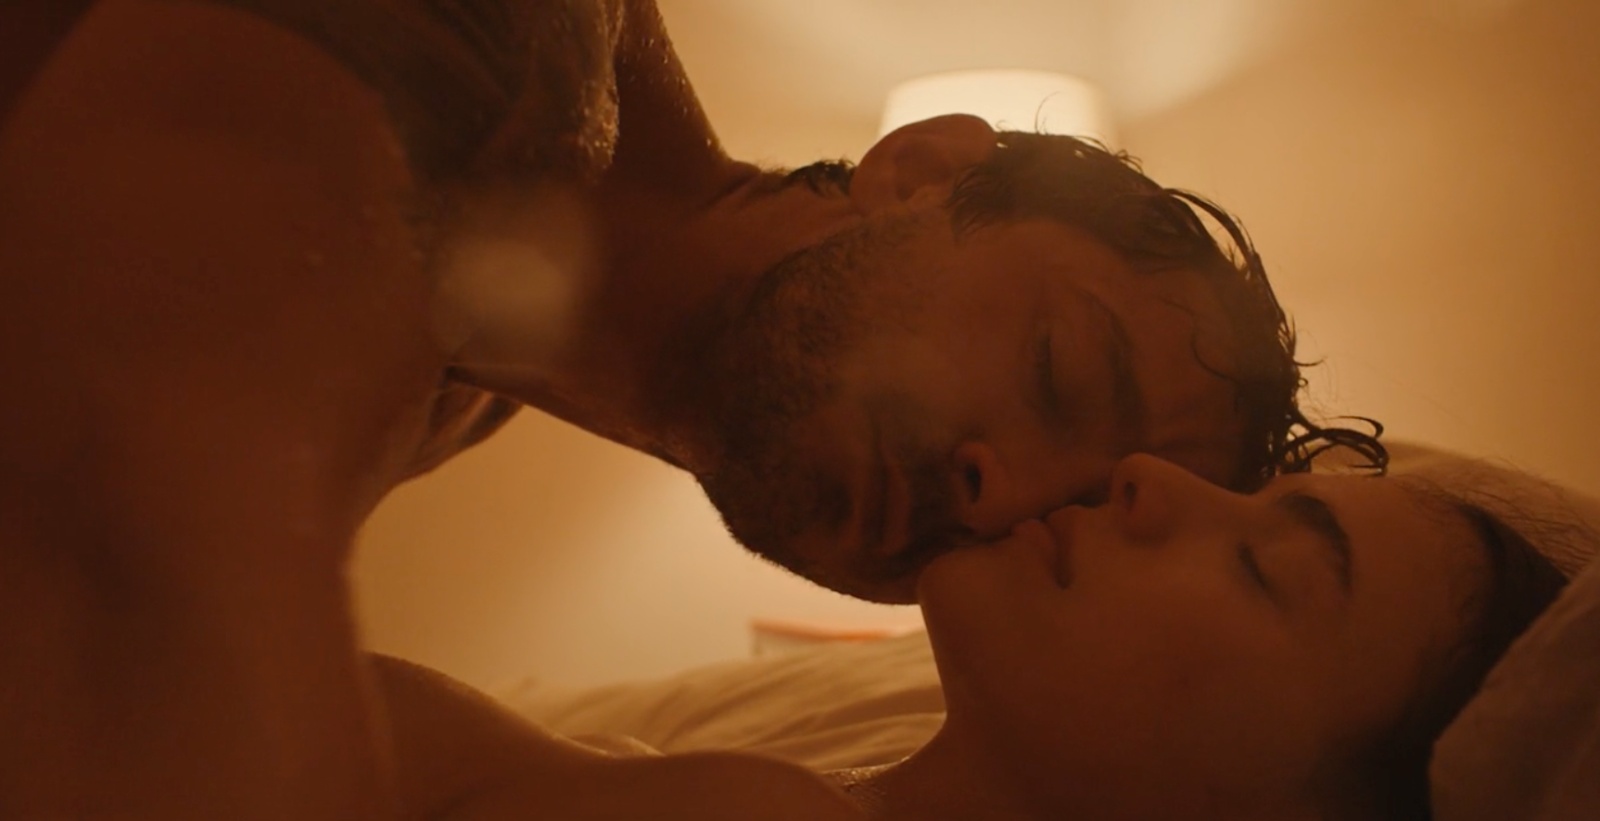 High Quality 4k Nathasha Malkova Porn Sex - Watch: Shia LaBeouf and Margaret Qualley Get Intimate in NSFW Music Video  Shot by Natasha Braier